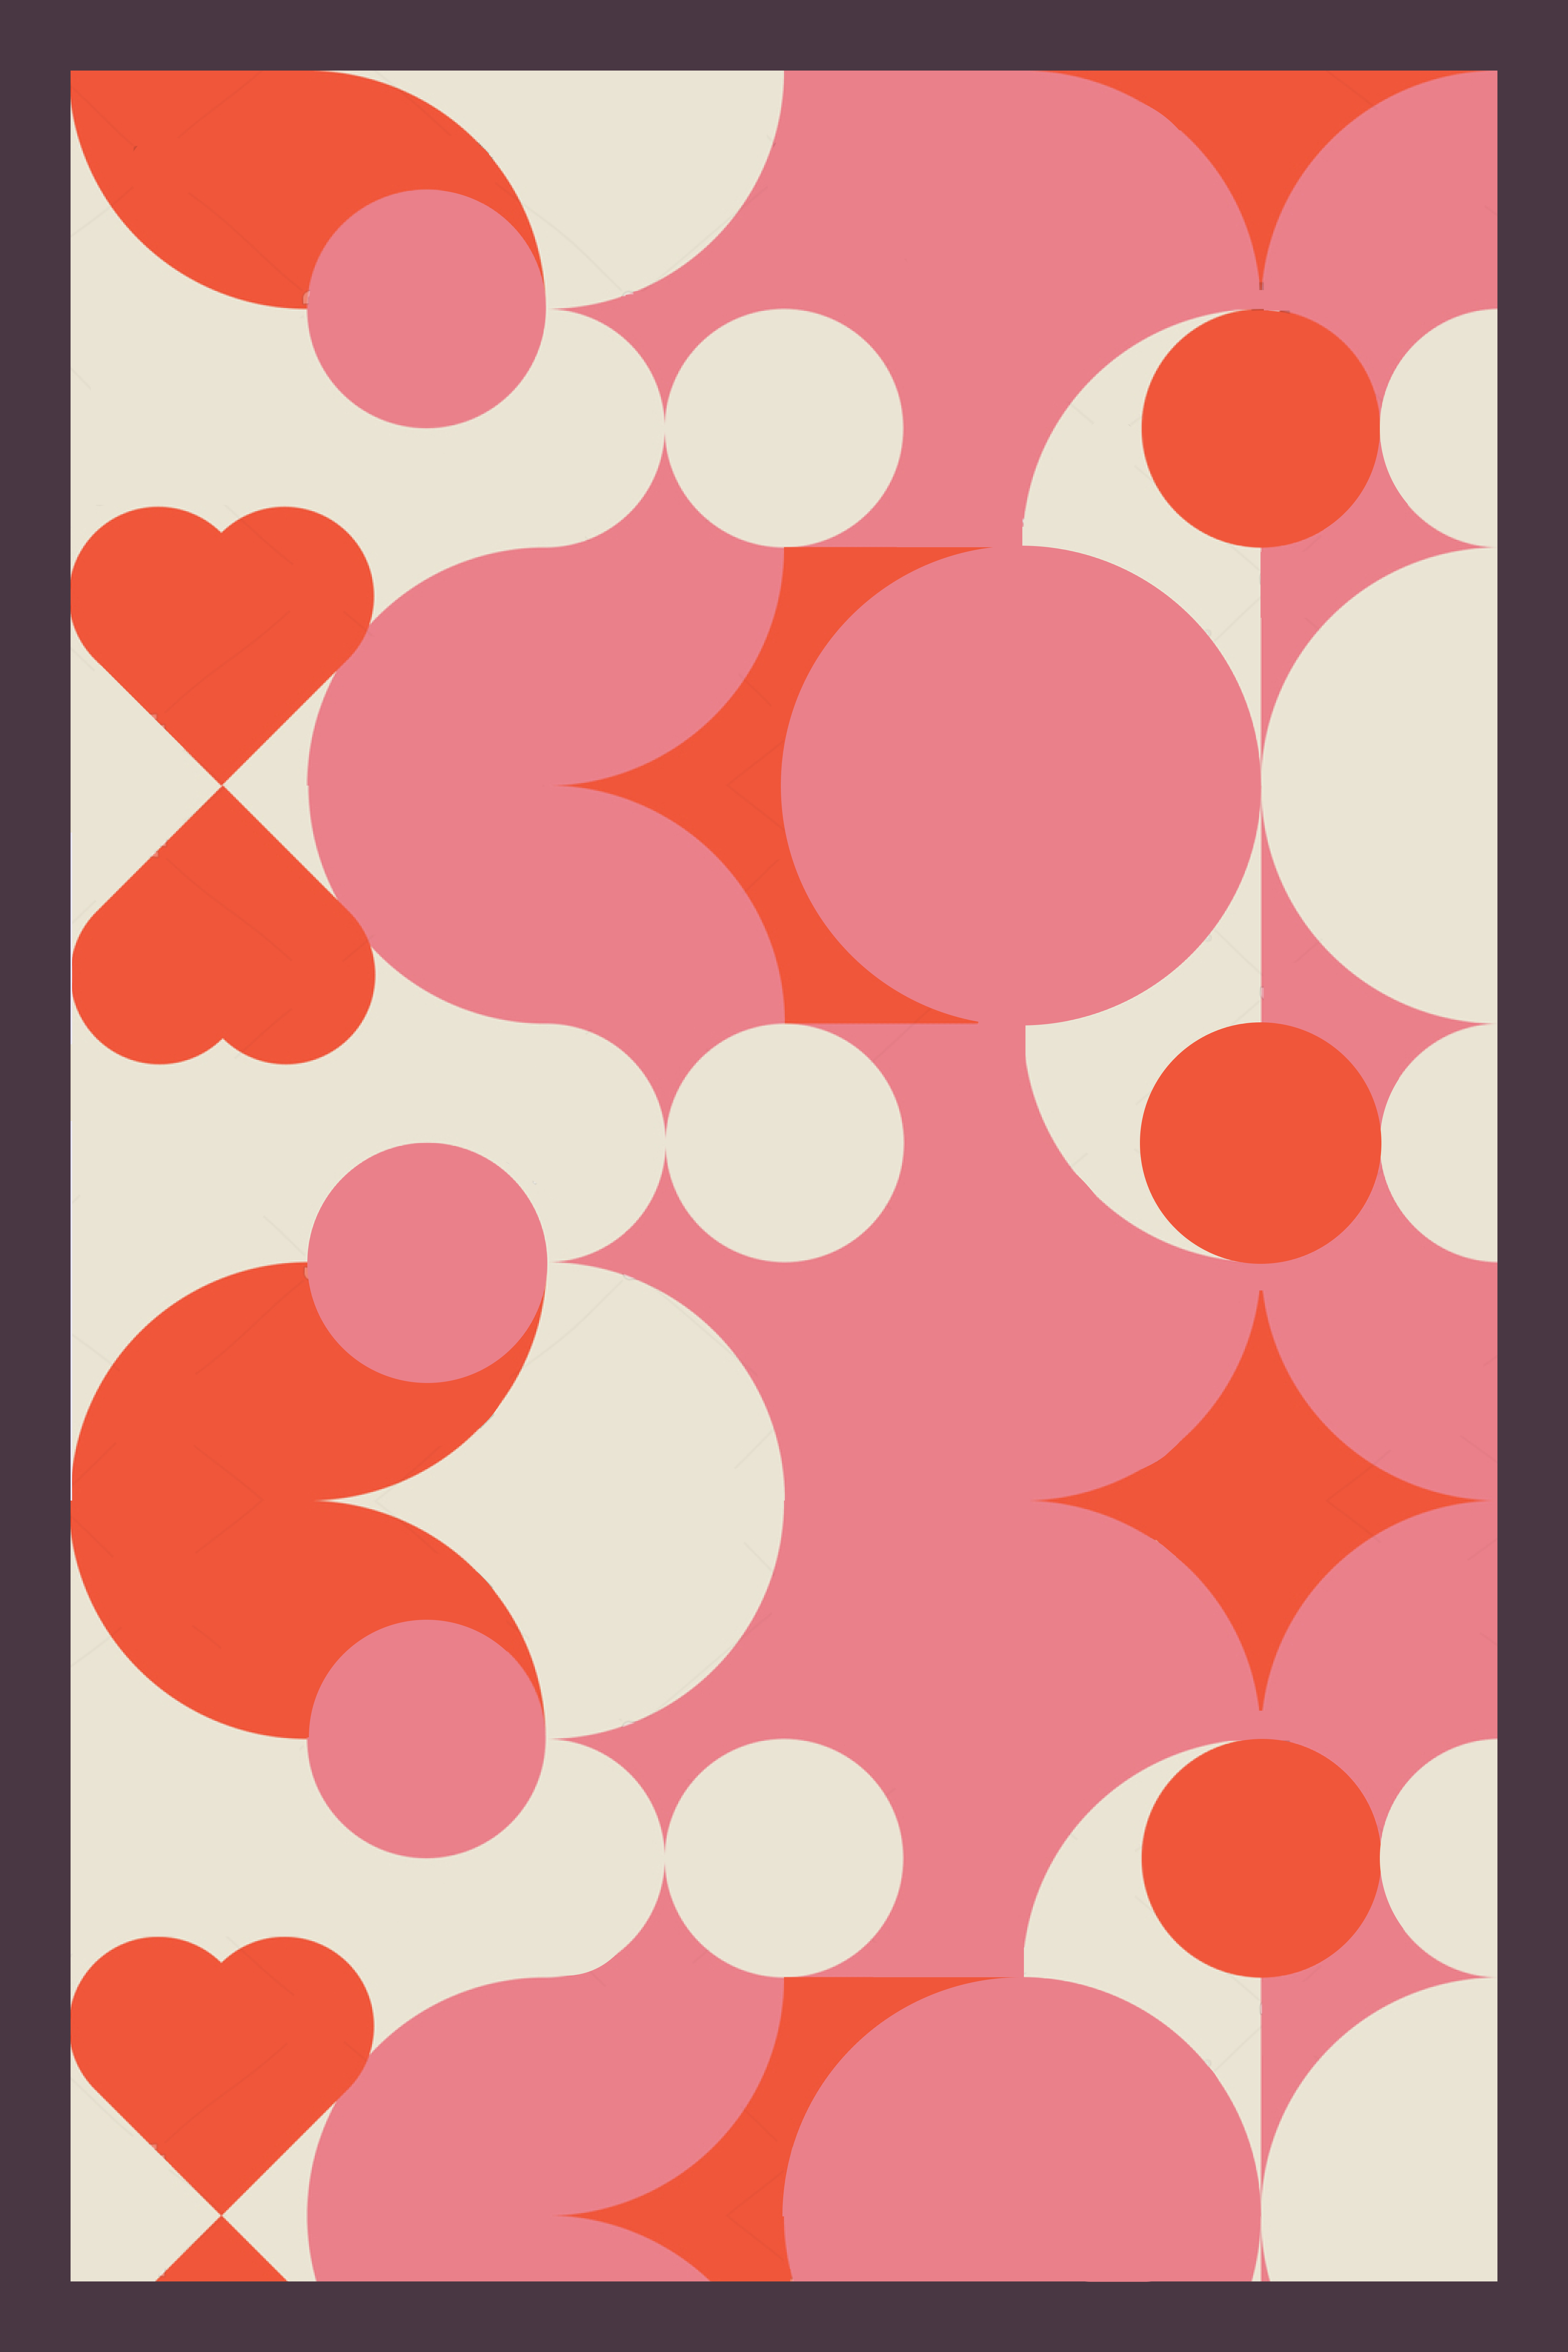 Geometric abstraction of hearts, lines and circles in pink, red and white.